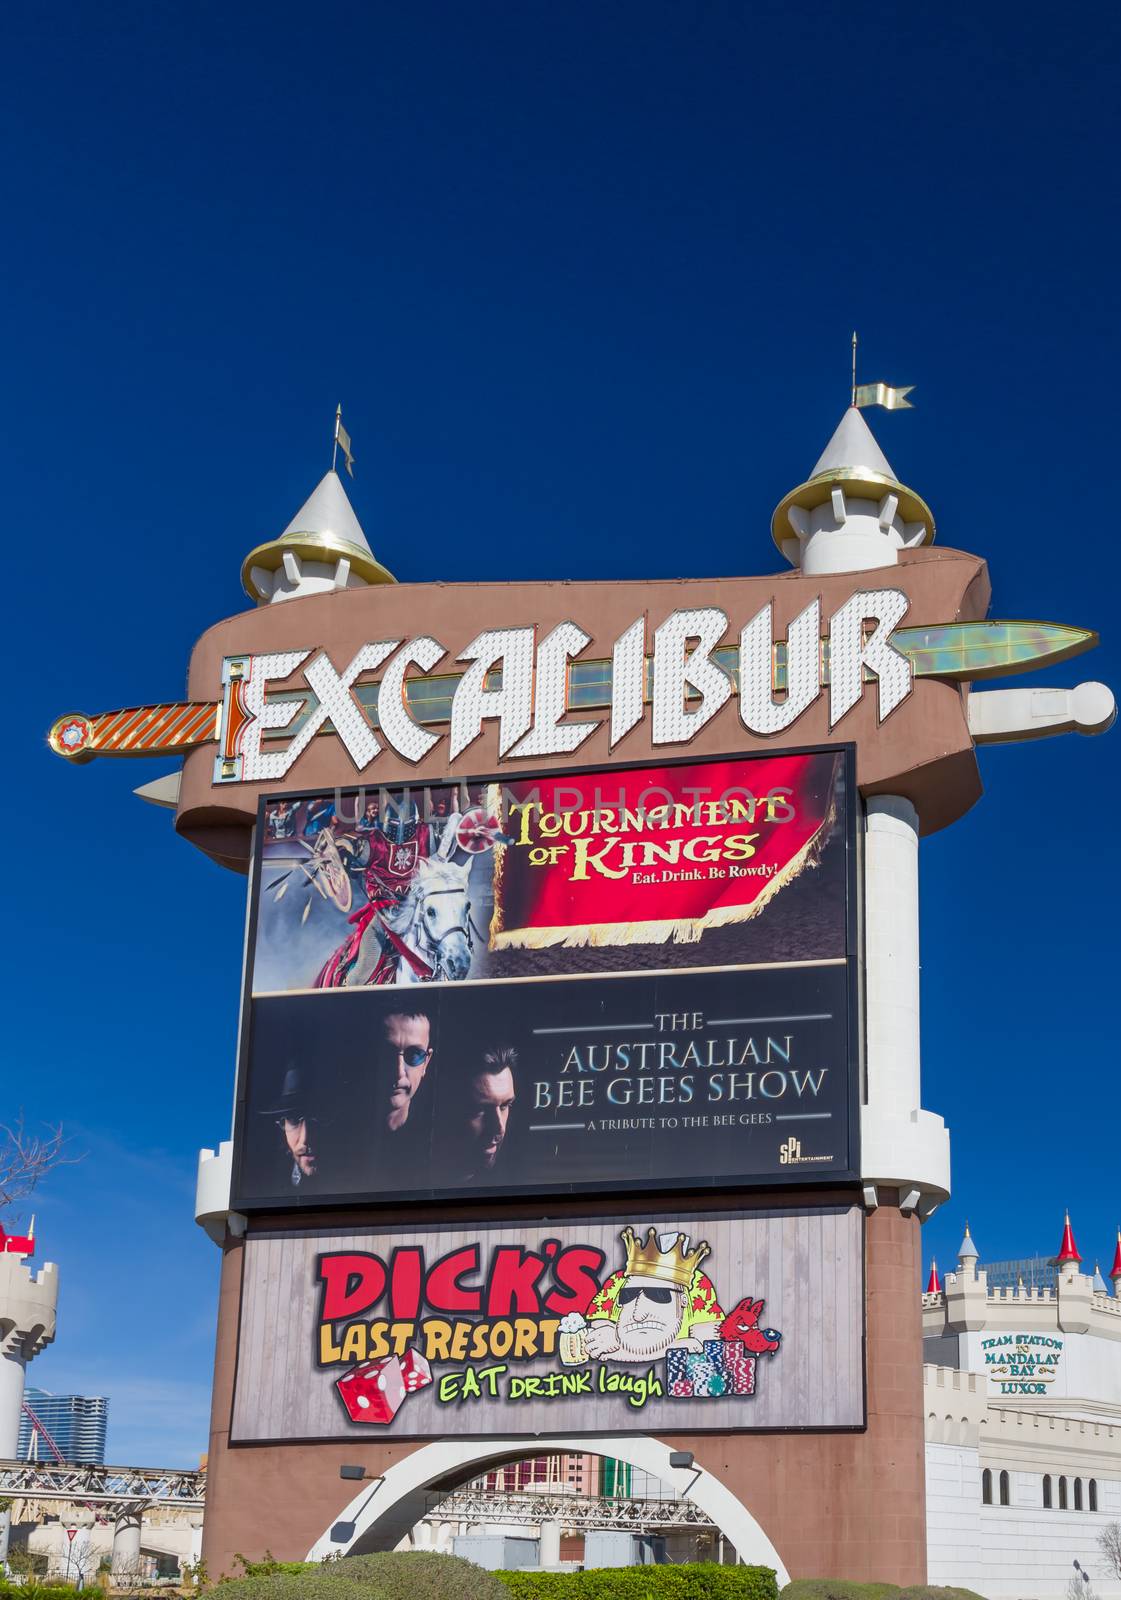 LAS VEGAS, NV/USA - FEBRUARY 15, 2016: The Excalibur Hotel and Casino. The Excalibur is on the Las Vegas Strip and is owned and operated by MGM Resorts International.